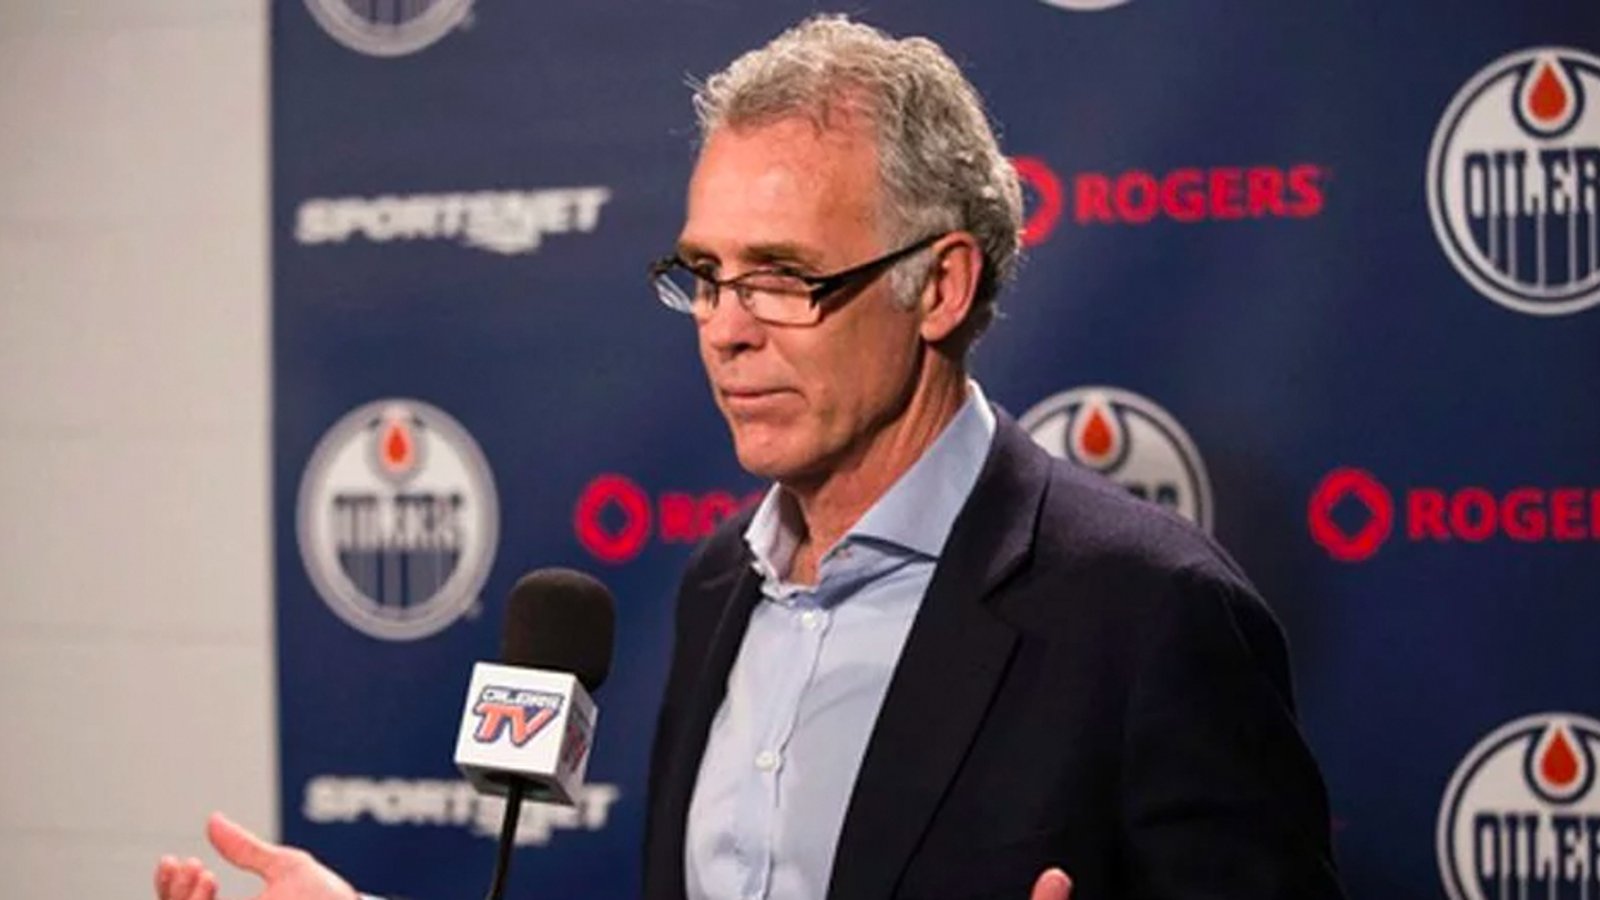 MacTavish is back in the game, gets new coaching job